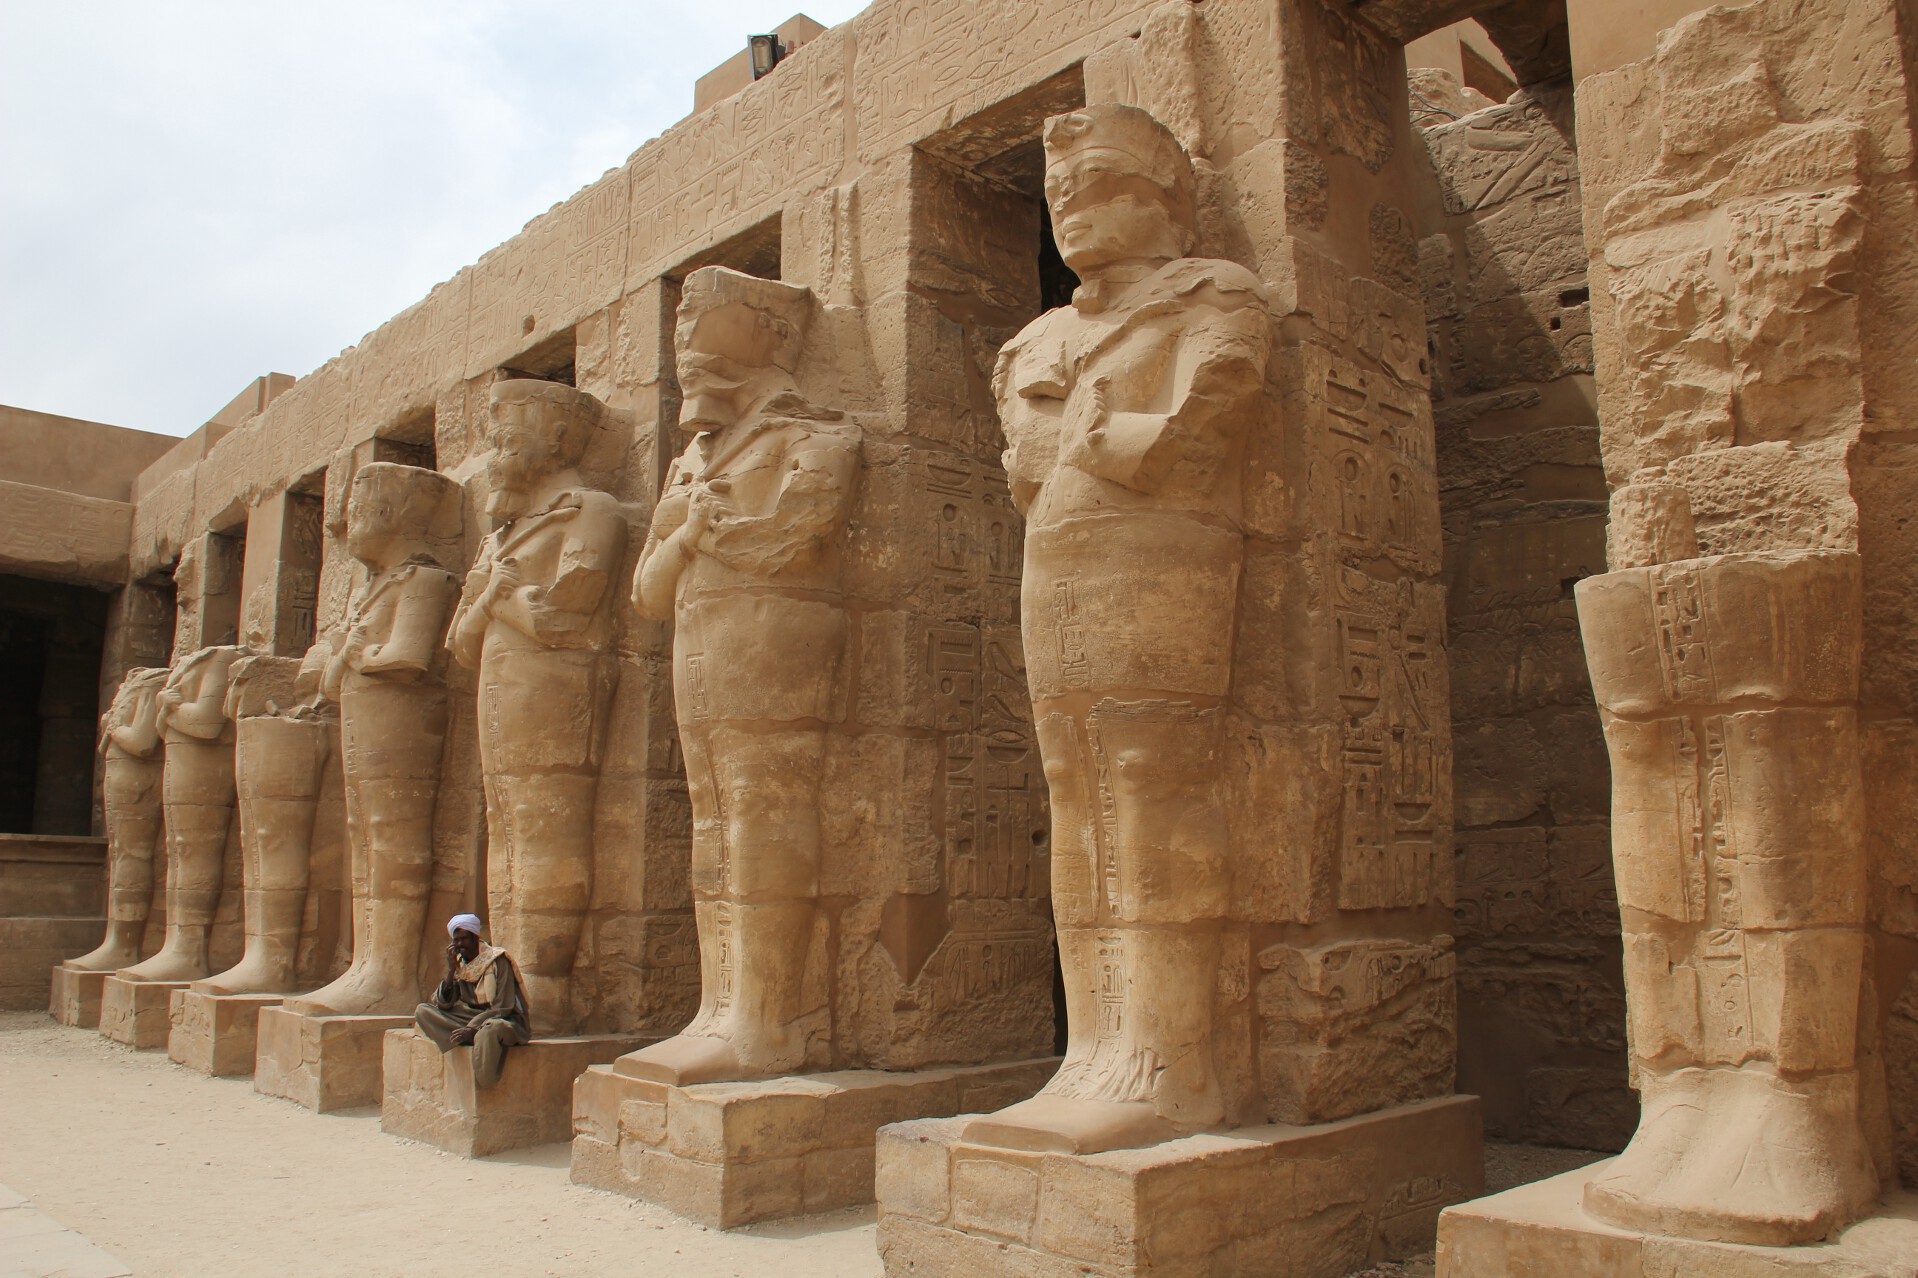 An Egyptian man sits in front of the Temple of Ramses III in Karnak's Temple of Amun.